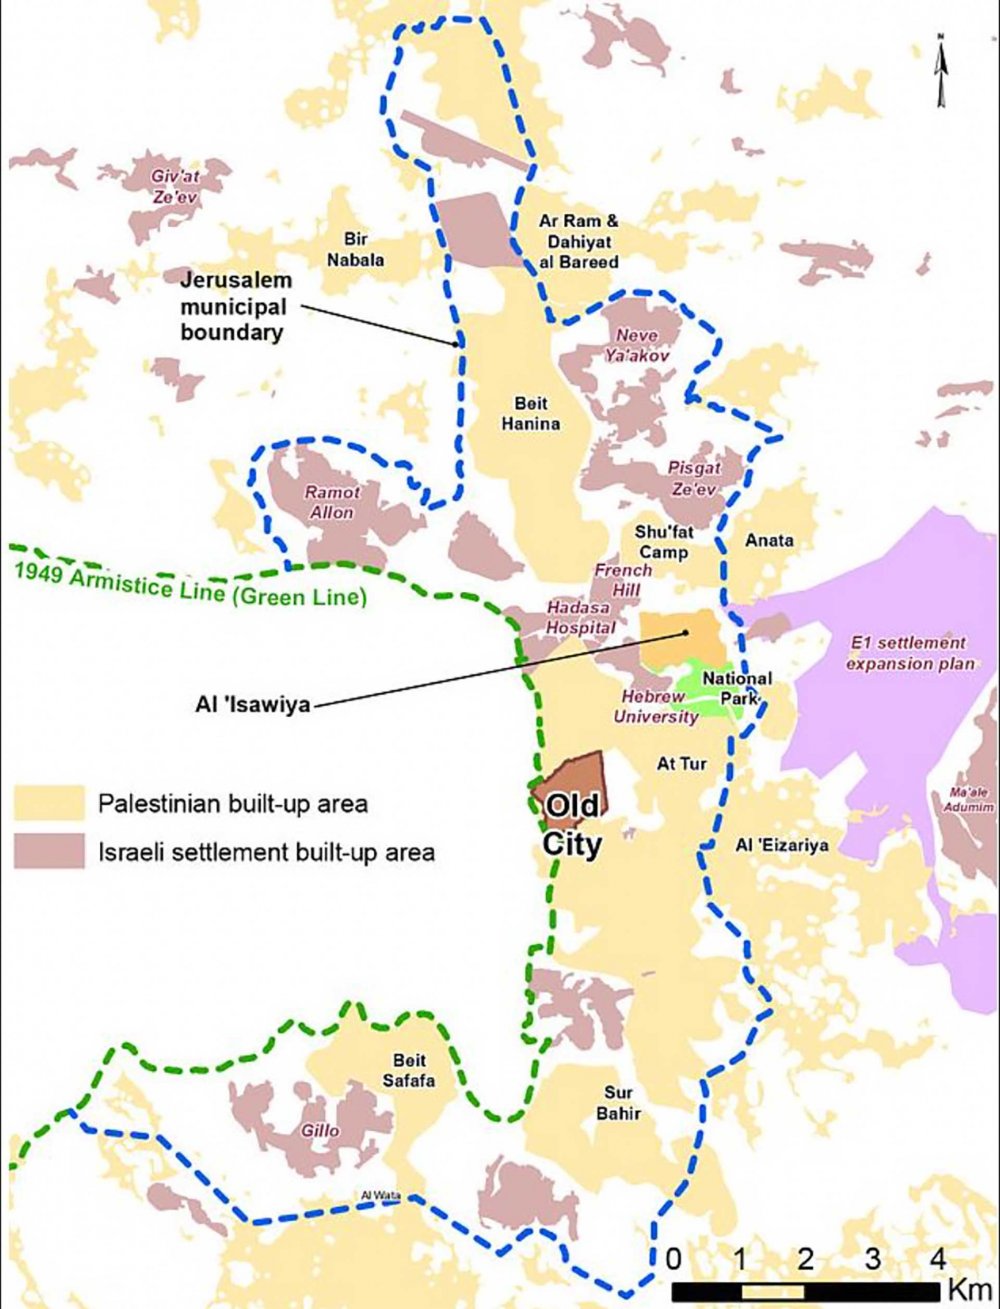 A map showing the city’s proposed national park in green in relation to al-‘Isawiyya, al-Tur, and East Jerusalem as a whole